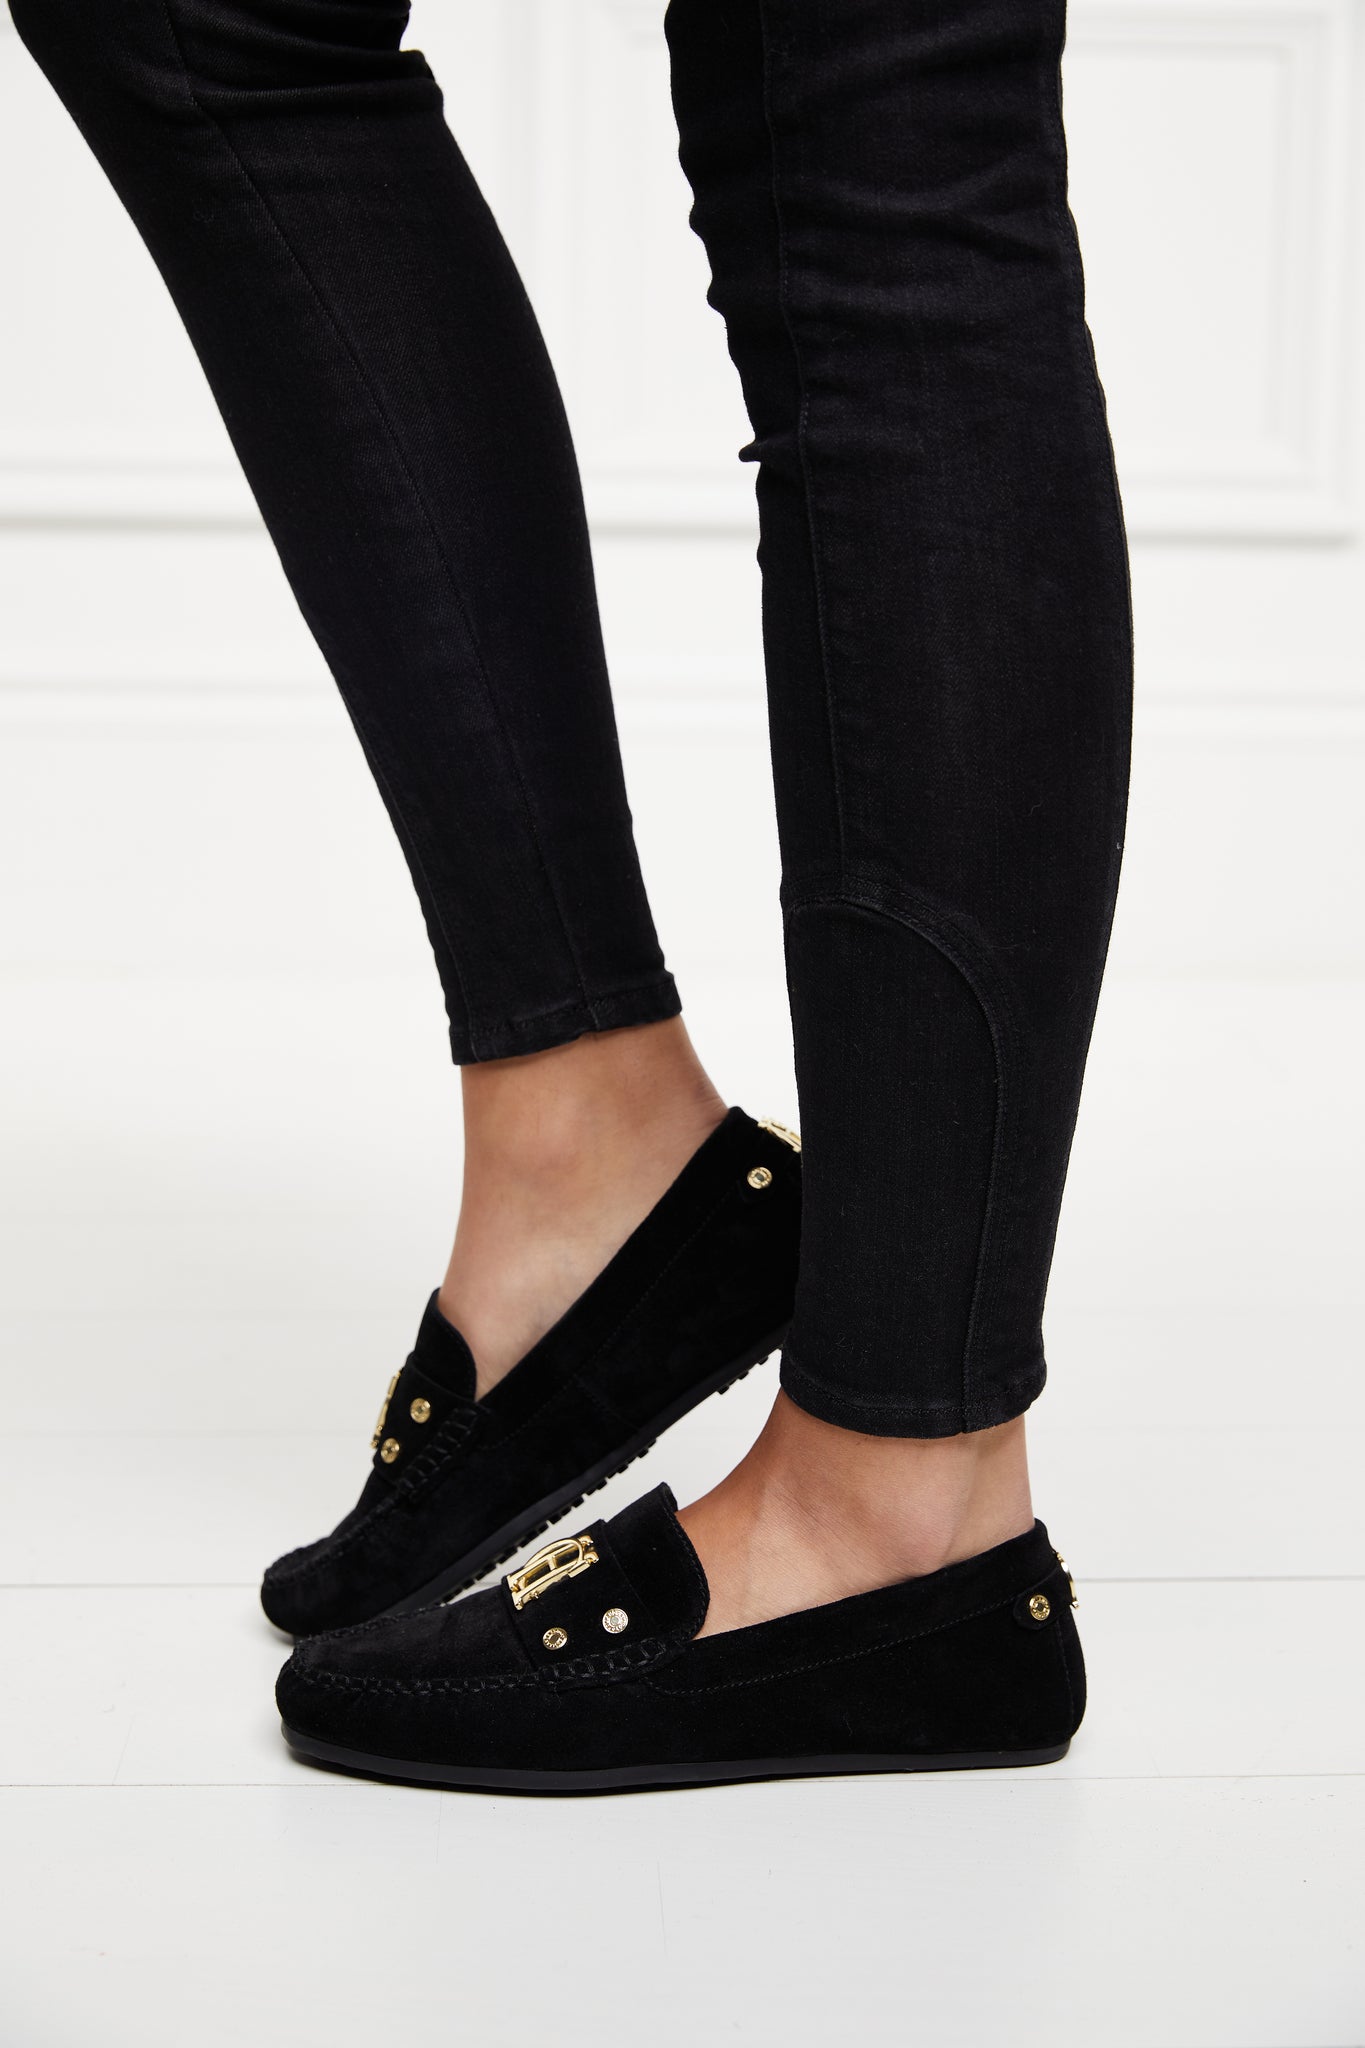 classic black suede loafers with a leather sole and top stitching details and gold hardware paired with skinny black jeans